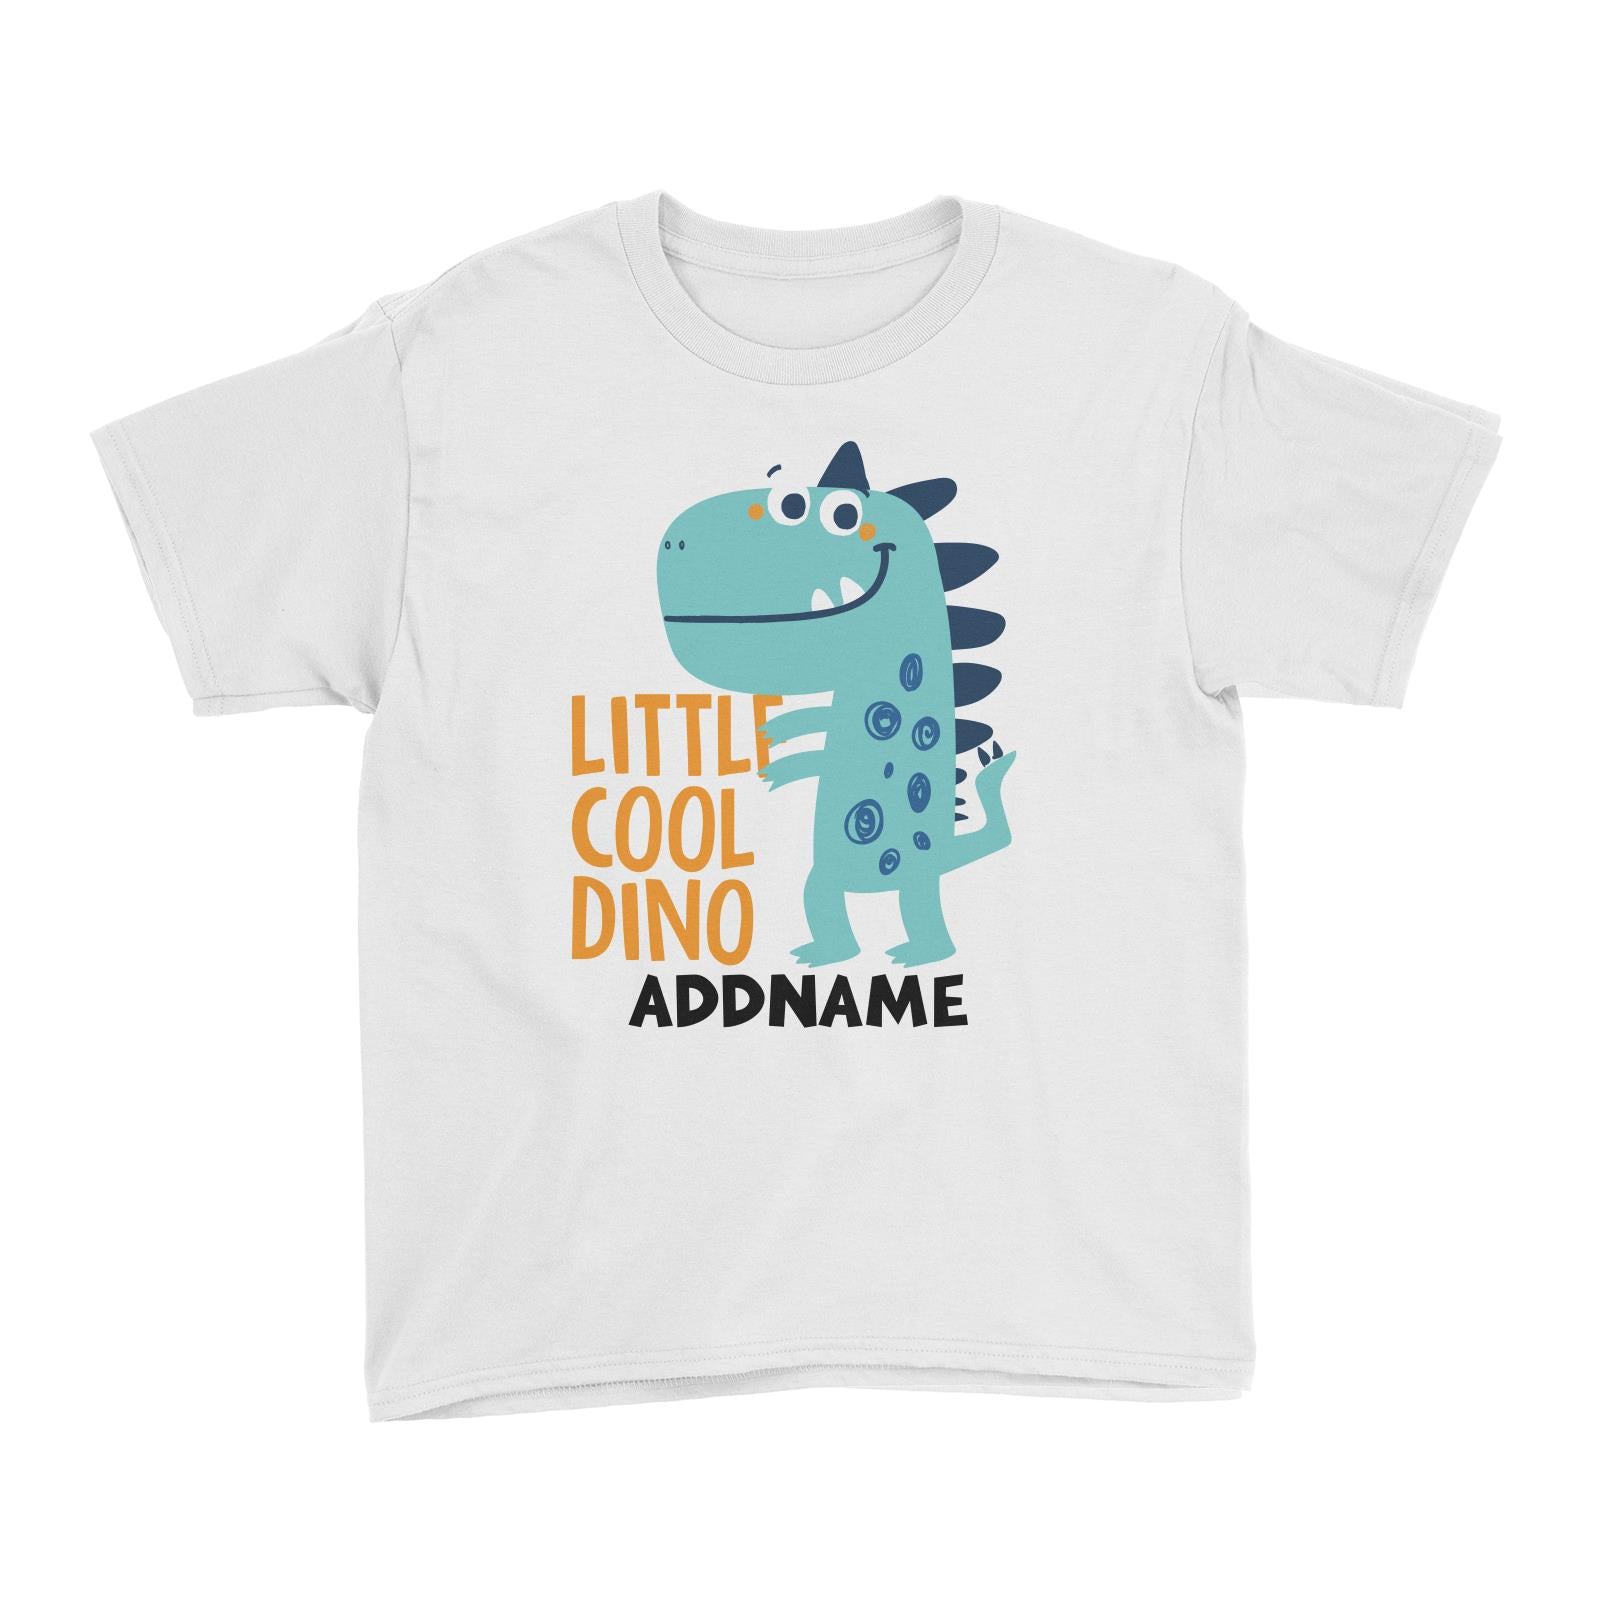 Little Cool Dino Addname White Kid's T-Shirt